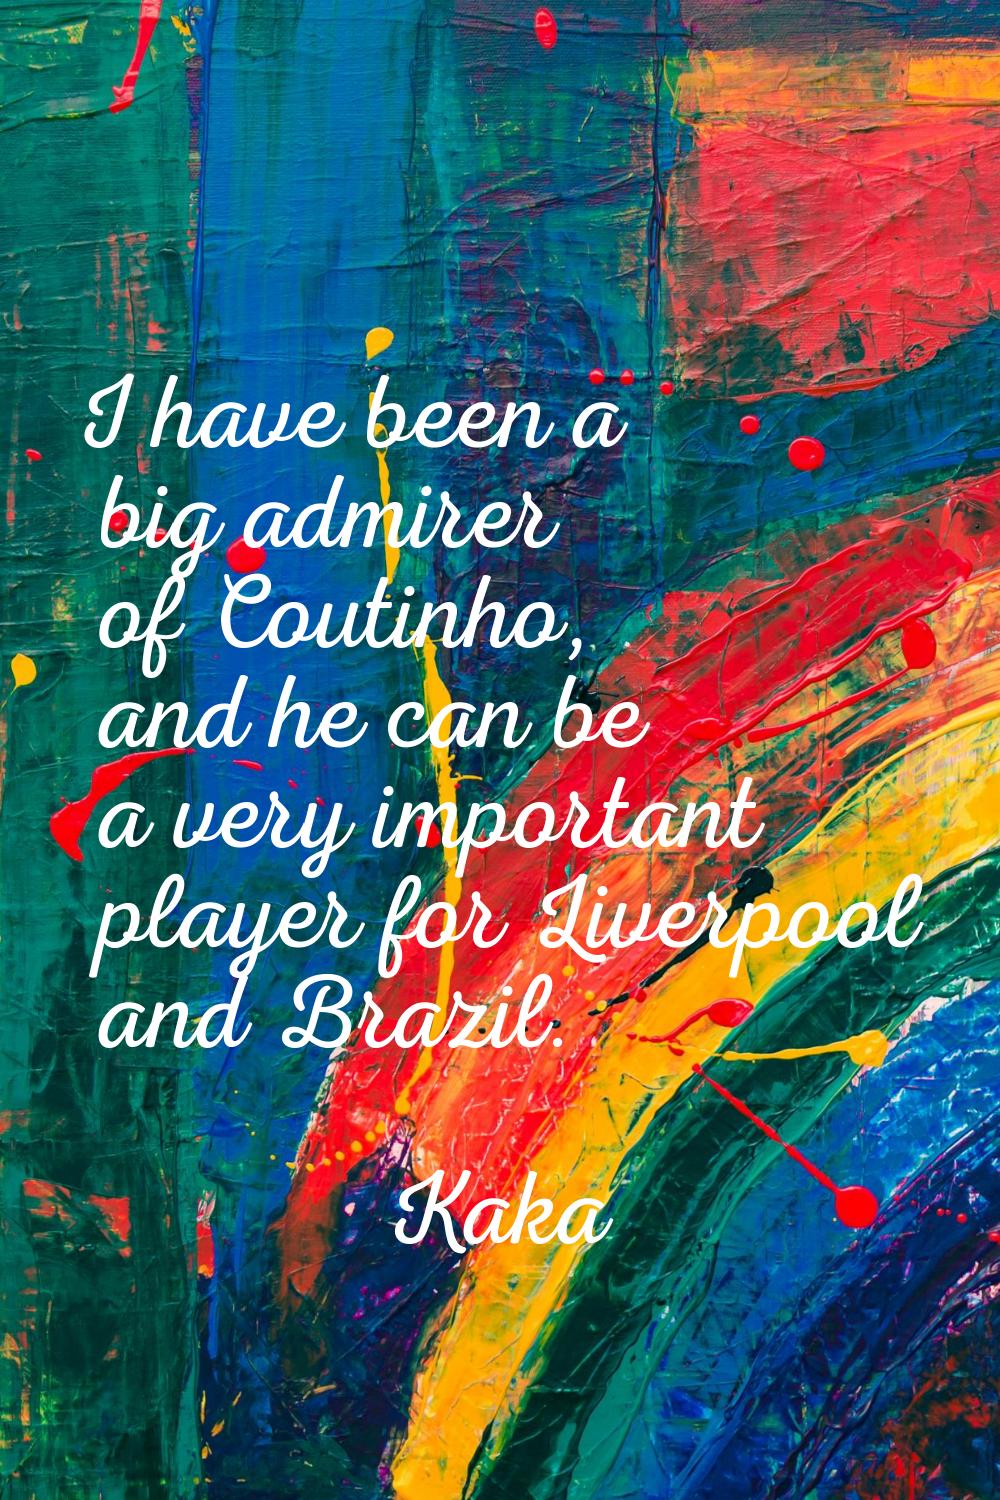 I have been a big admirer of Coutinho, and he can be a very important player for Liverpool and Braz